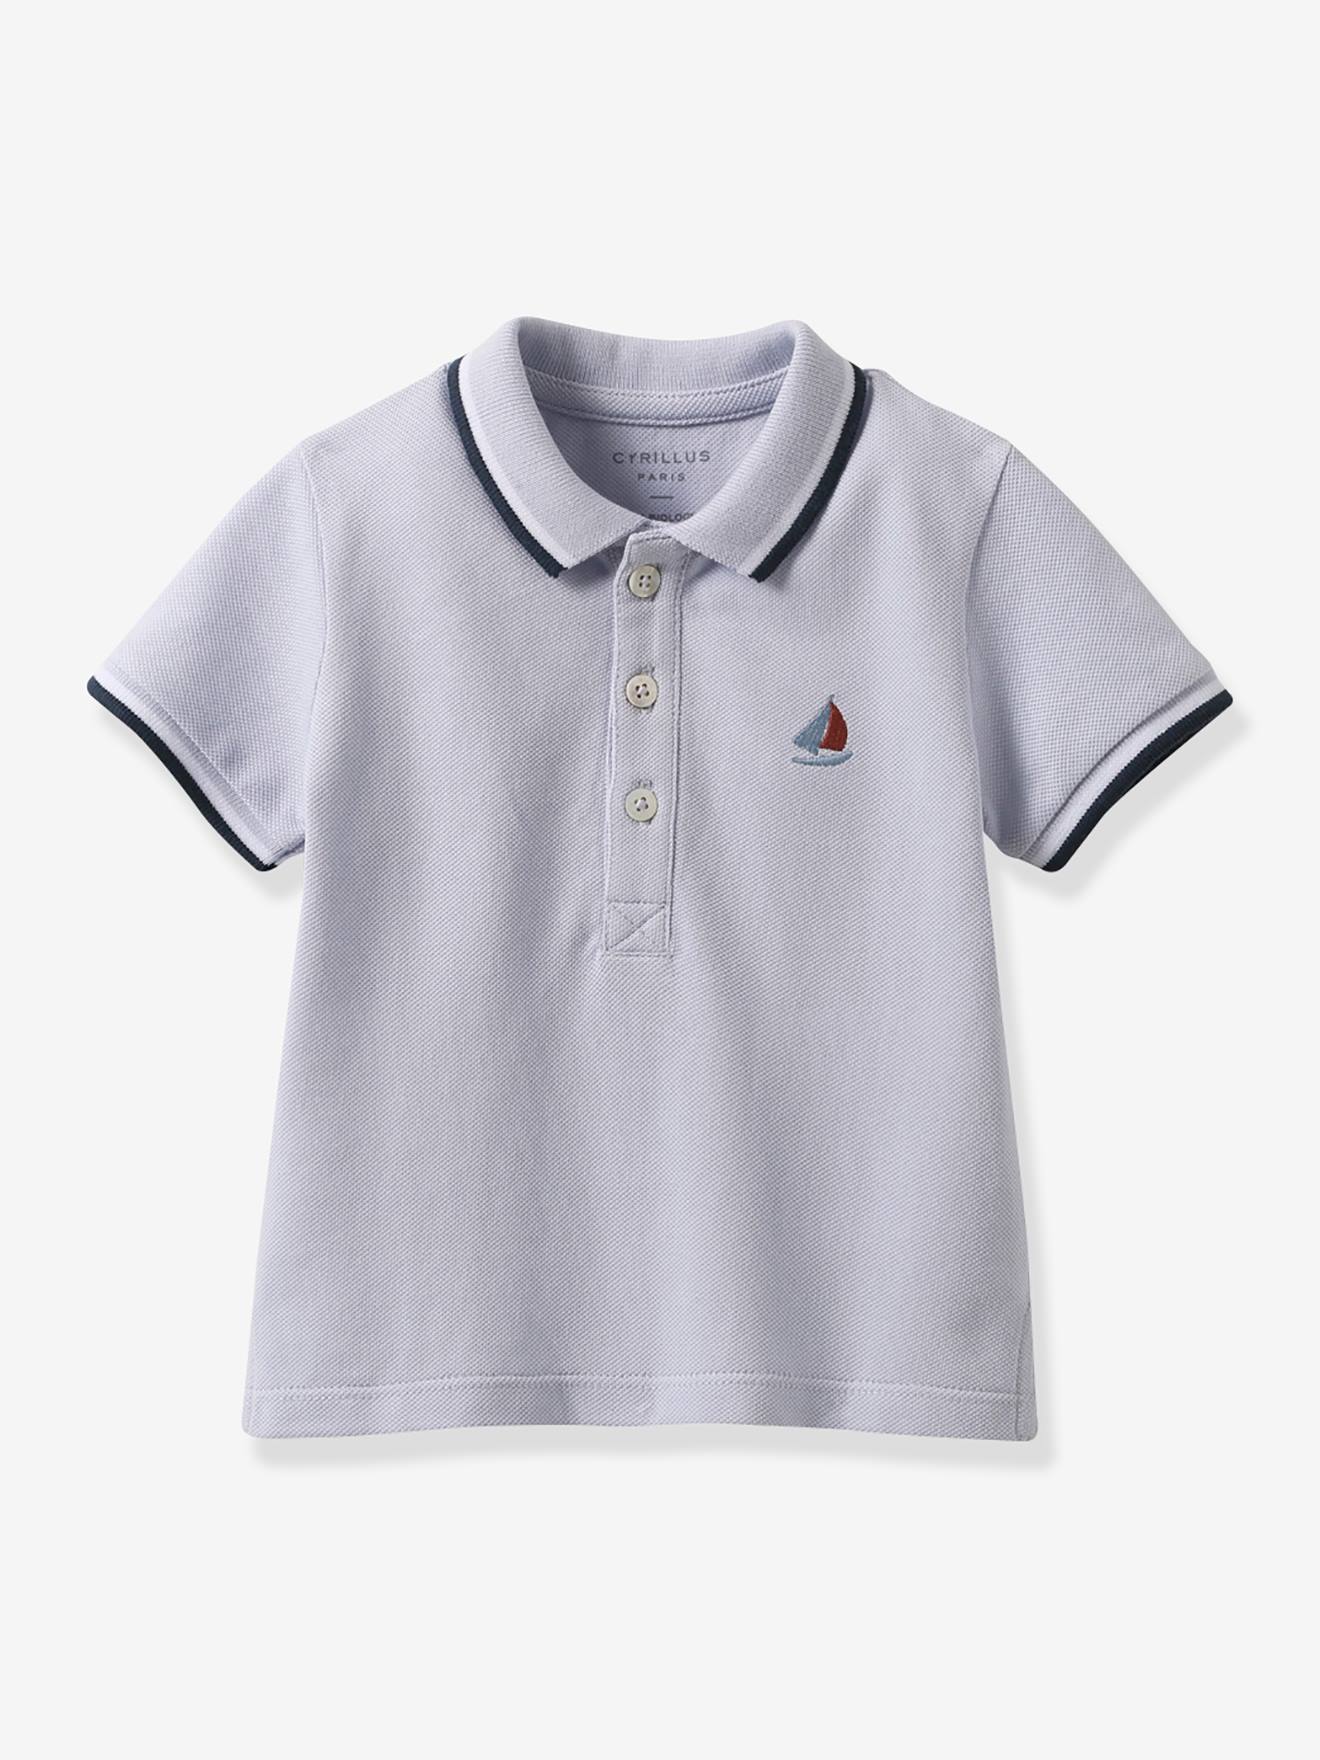 Pique Knit Polo Shirt in Organic Cotton for Babies, by CYRILLUS grey blue